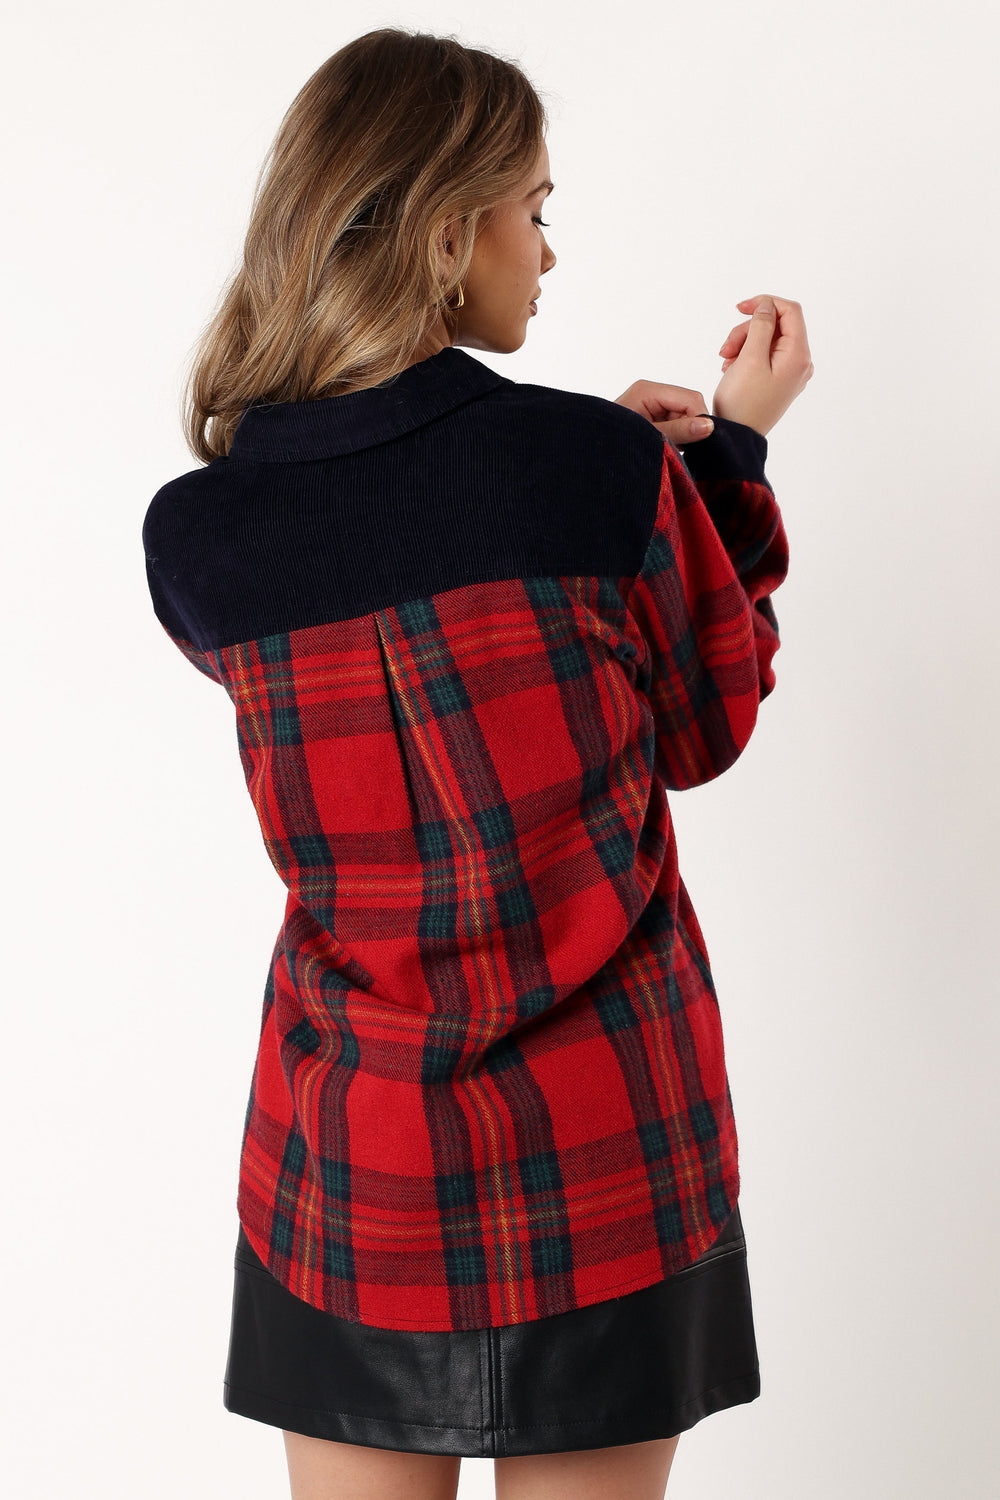 Petal and Pup USA OUTERWEAR Lucille Plaid Shacket - Red/Navy